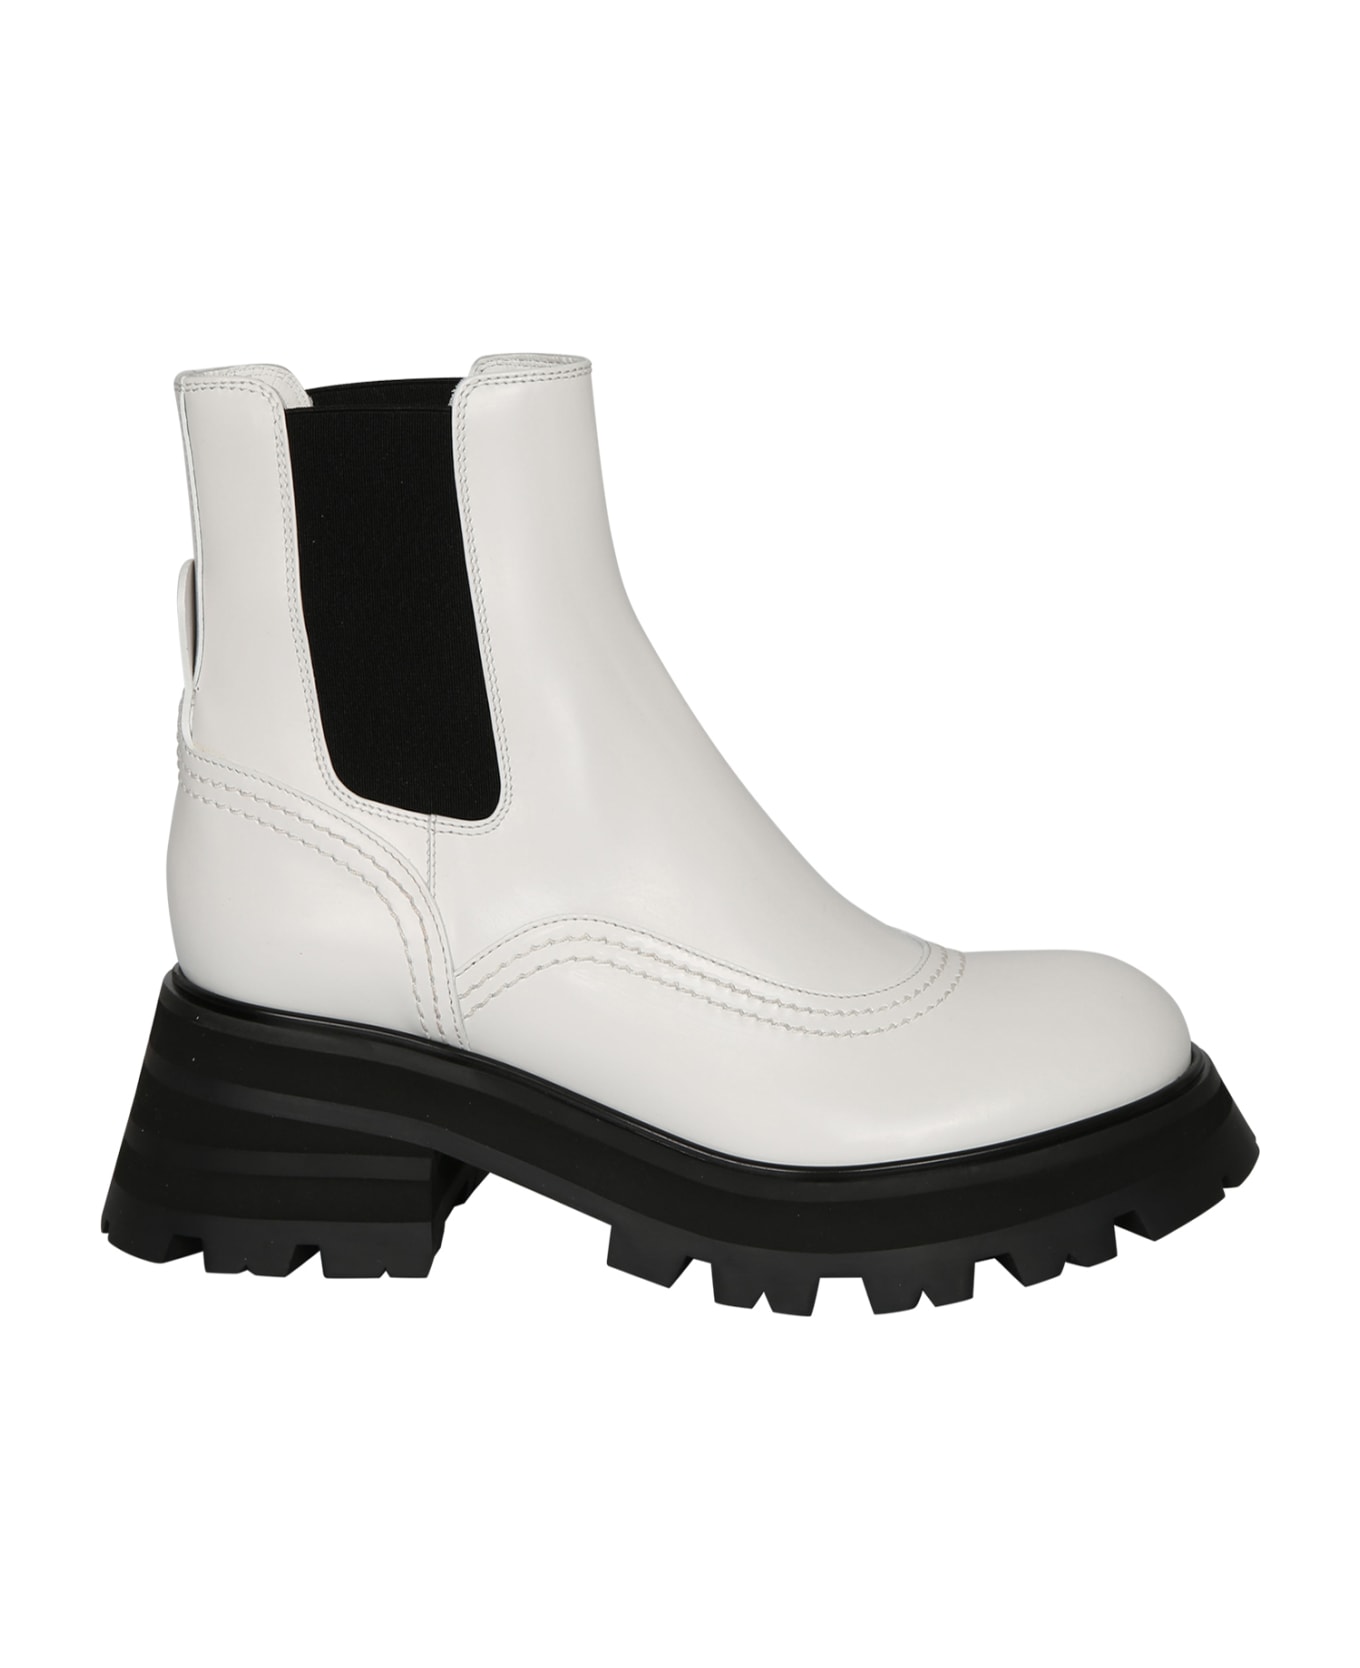 Alexander McQueen Ankle Boots - White ブーツ